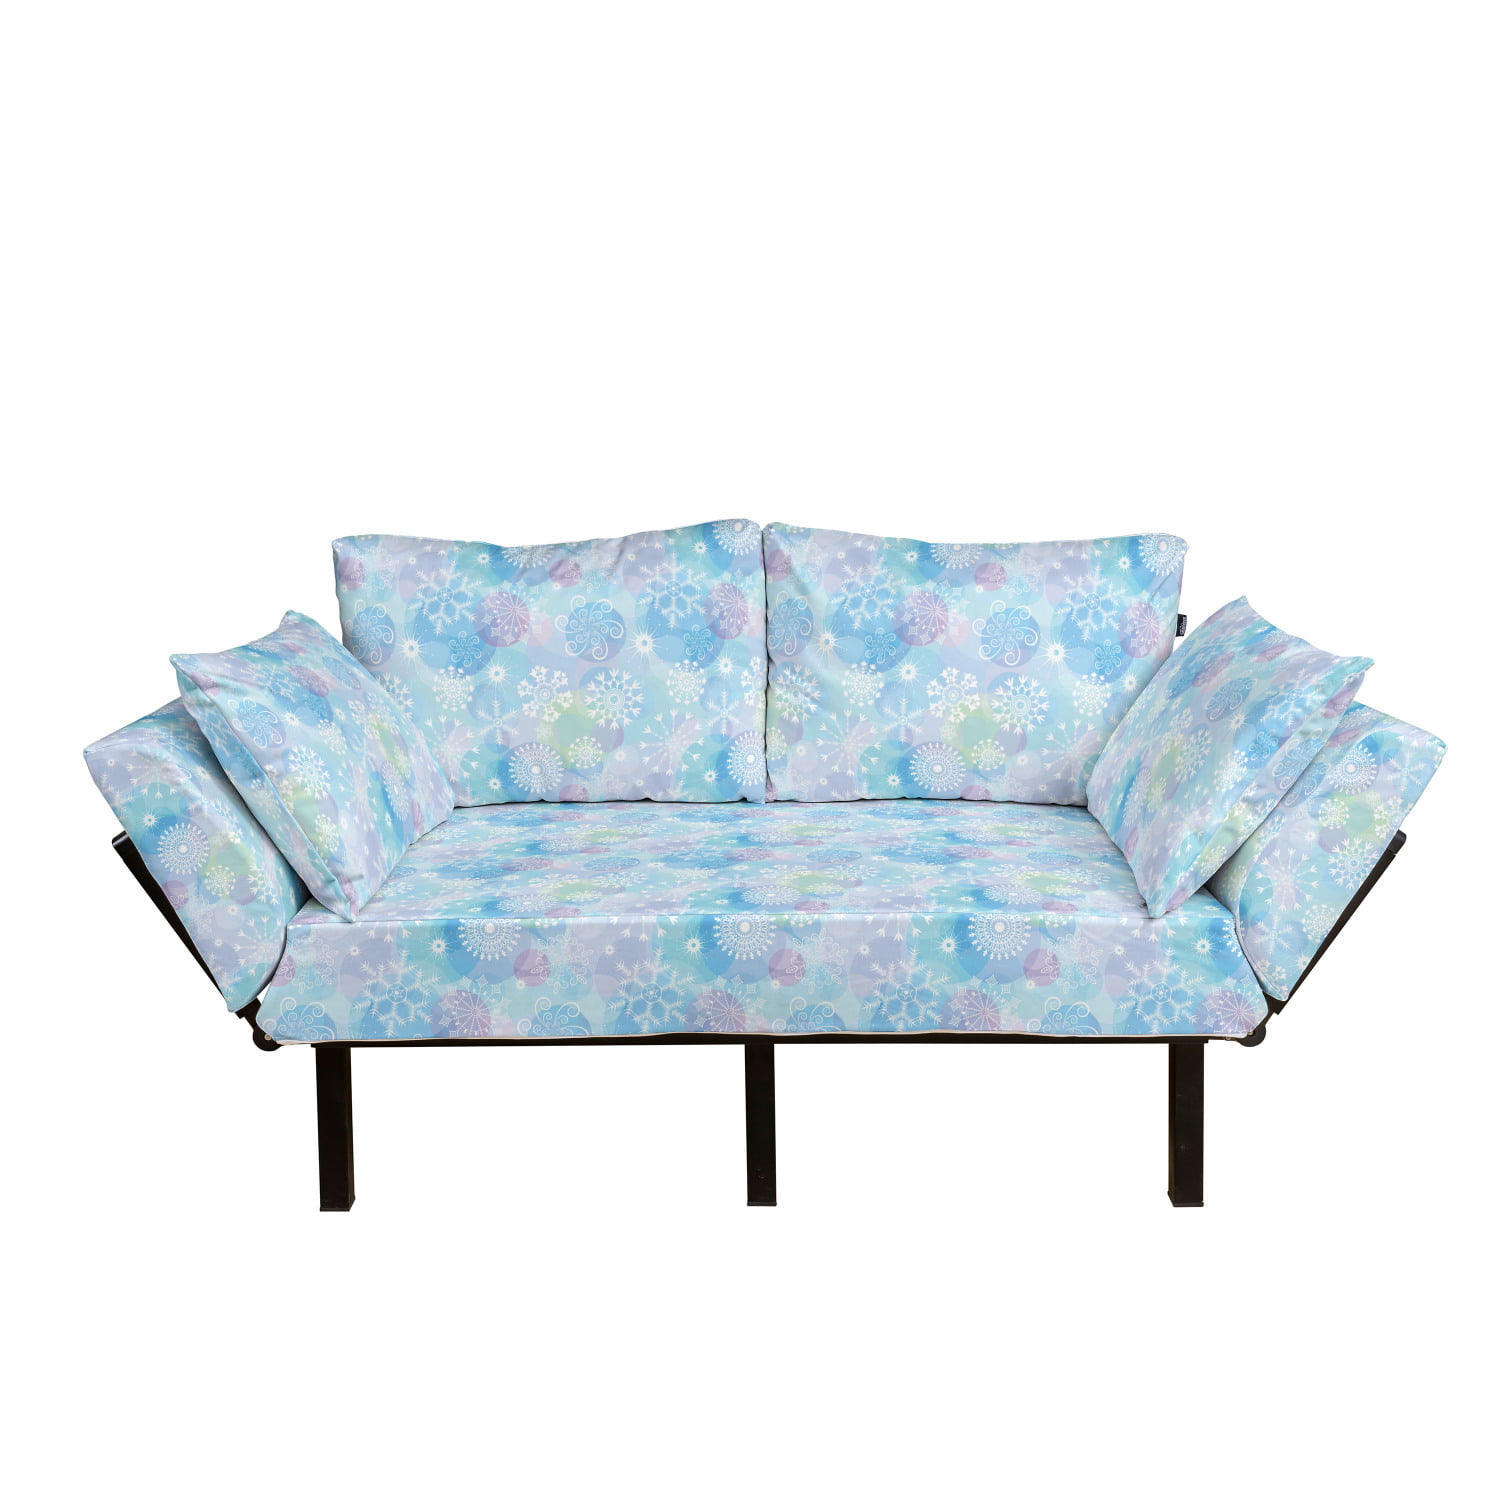 Vintage Floral Composition with Middle Cultures Inspirations and Paisleys Daybed with Metal Frame Upholstered Sofa for Living Dorm Loveseat Multicolor Ambesonne Mandala Futon Couch 